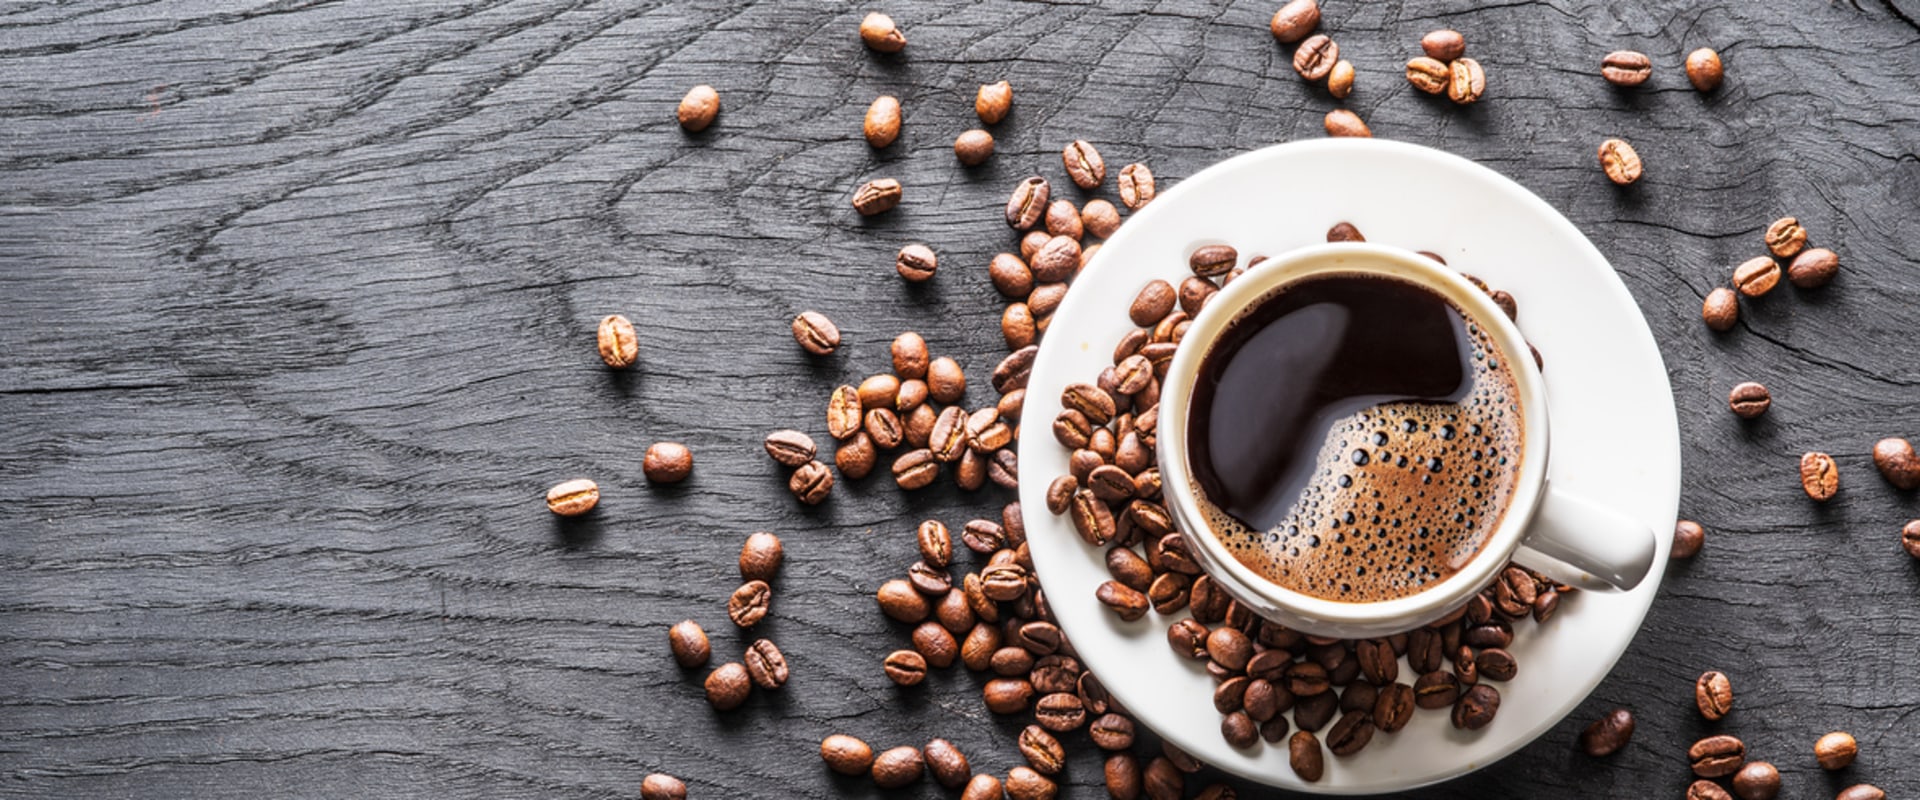 The Health Benefits of Drinking Coffee